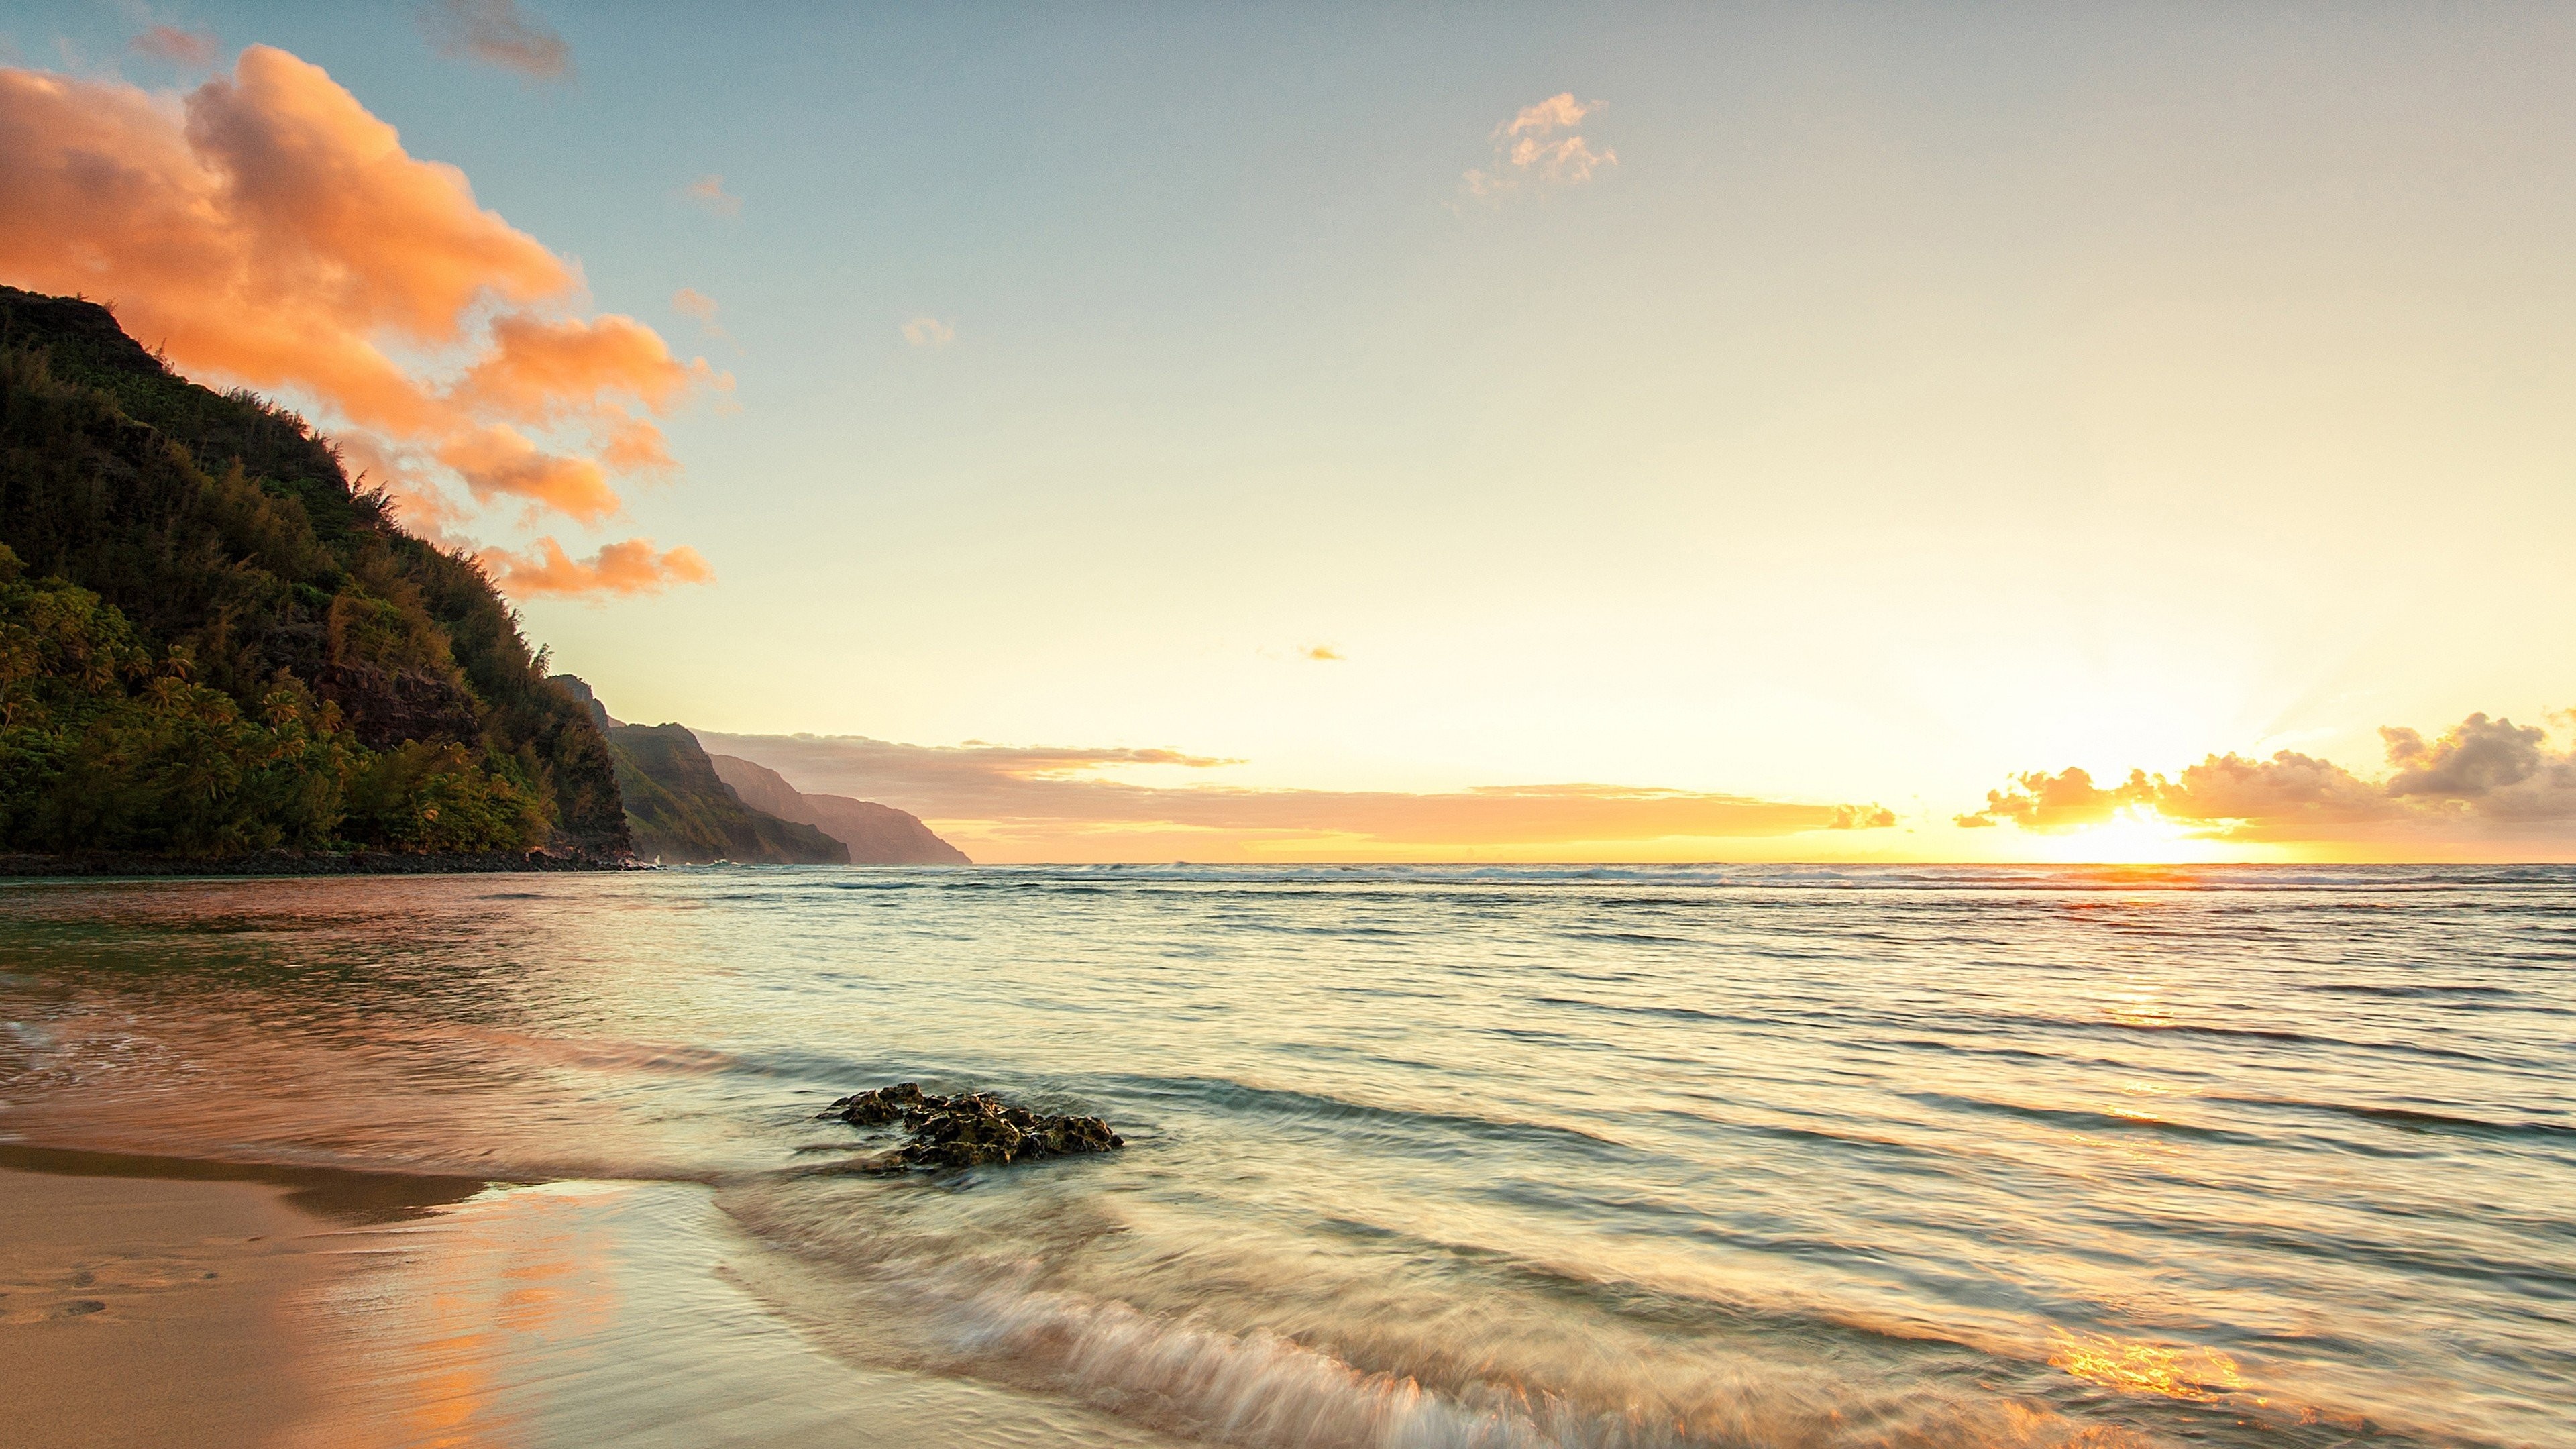 Hawaii in pictures, Captivating wallpapers, Immersive visuals, Breathtaking landscapes, 3840x2160 4K Desktop